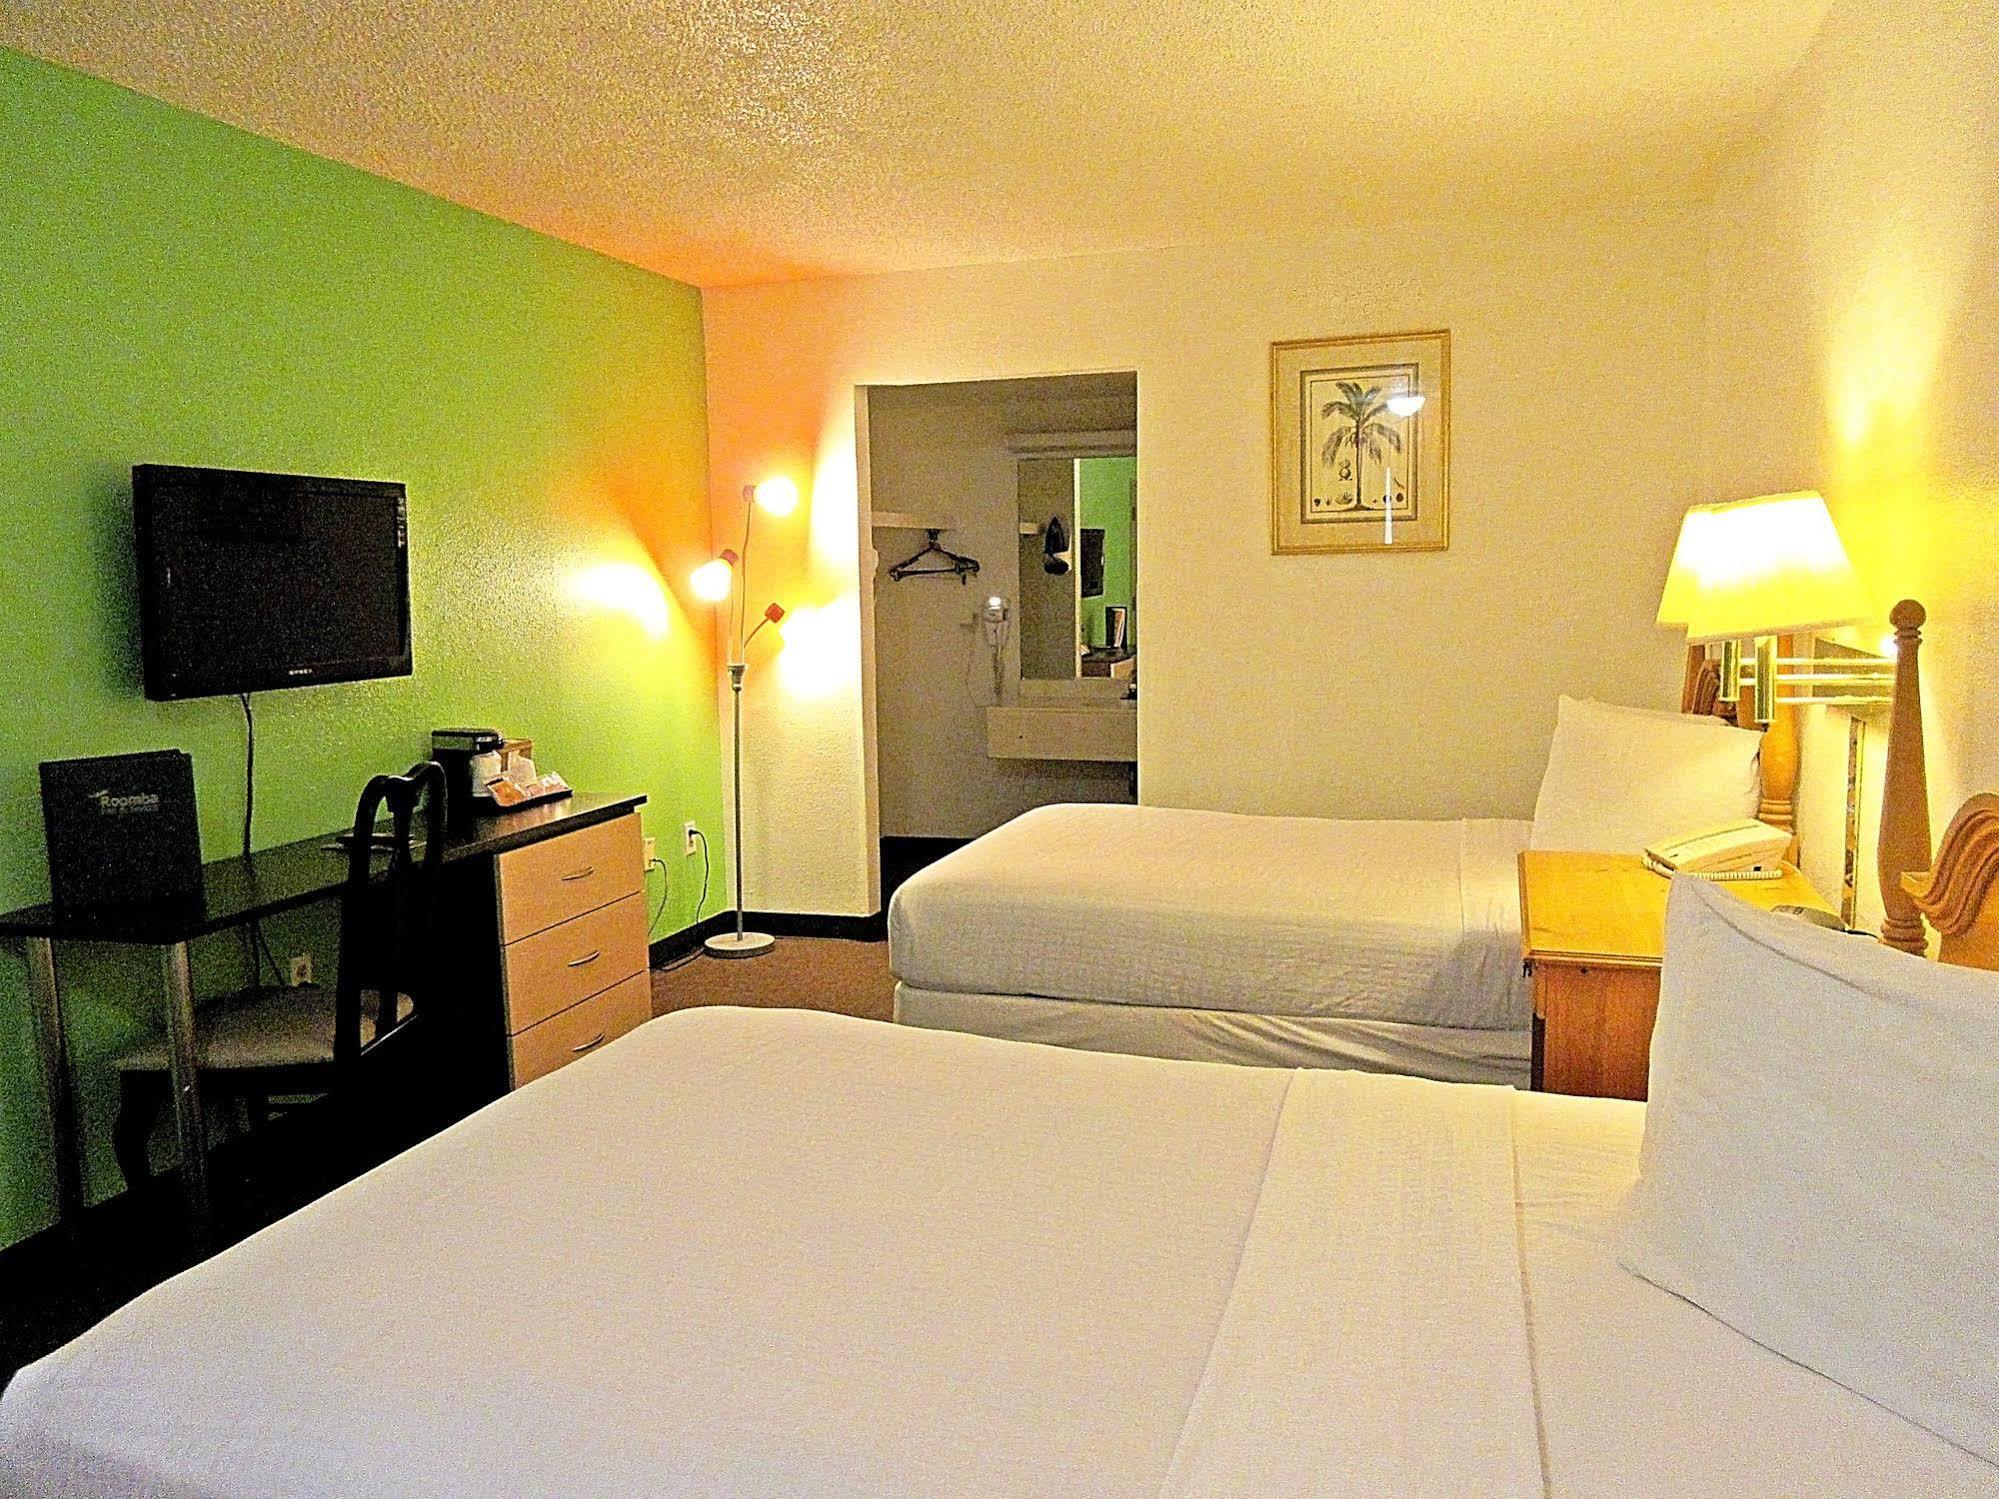 Roomba Inn & Suites At Old Town Kissimmee Exteriér fotografie